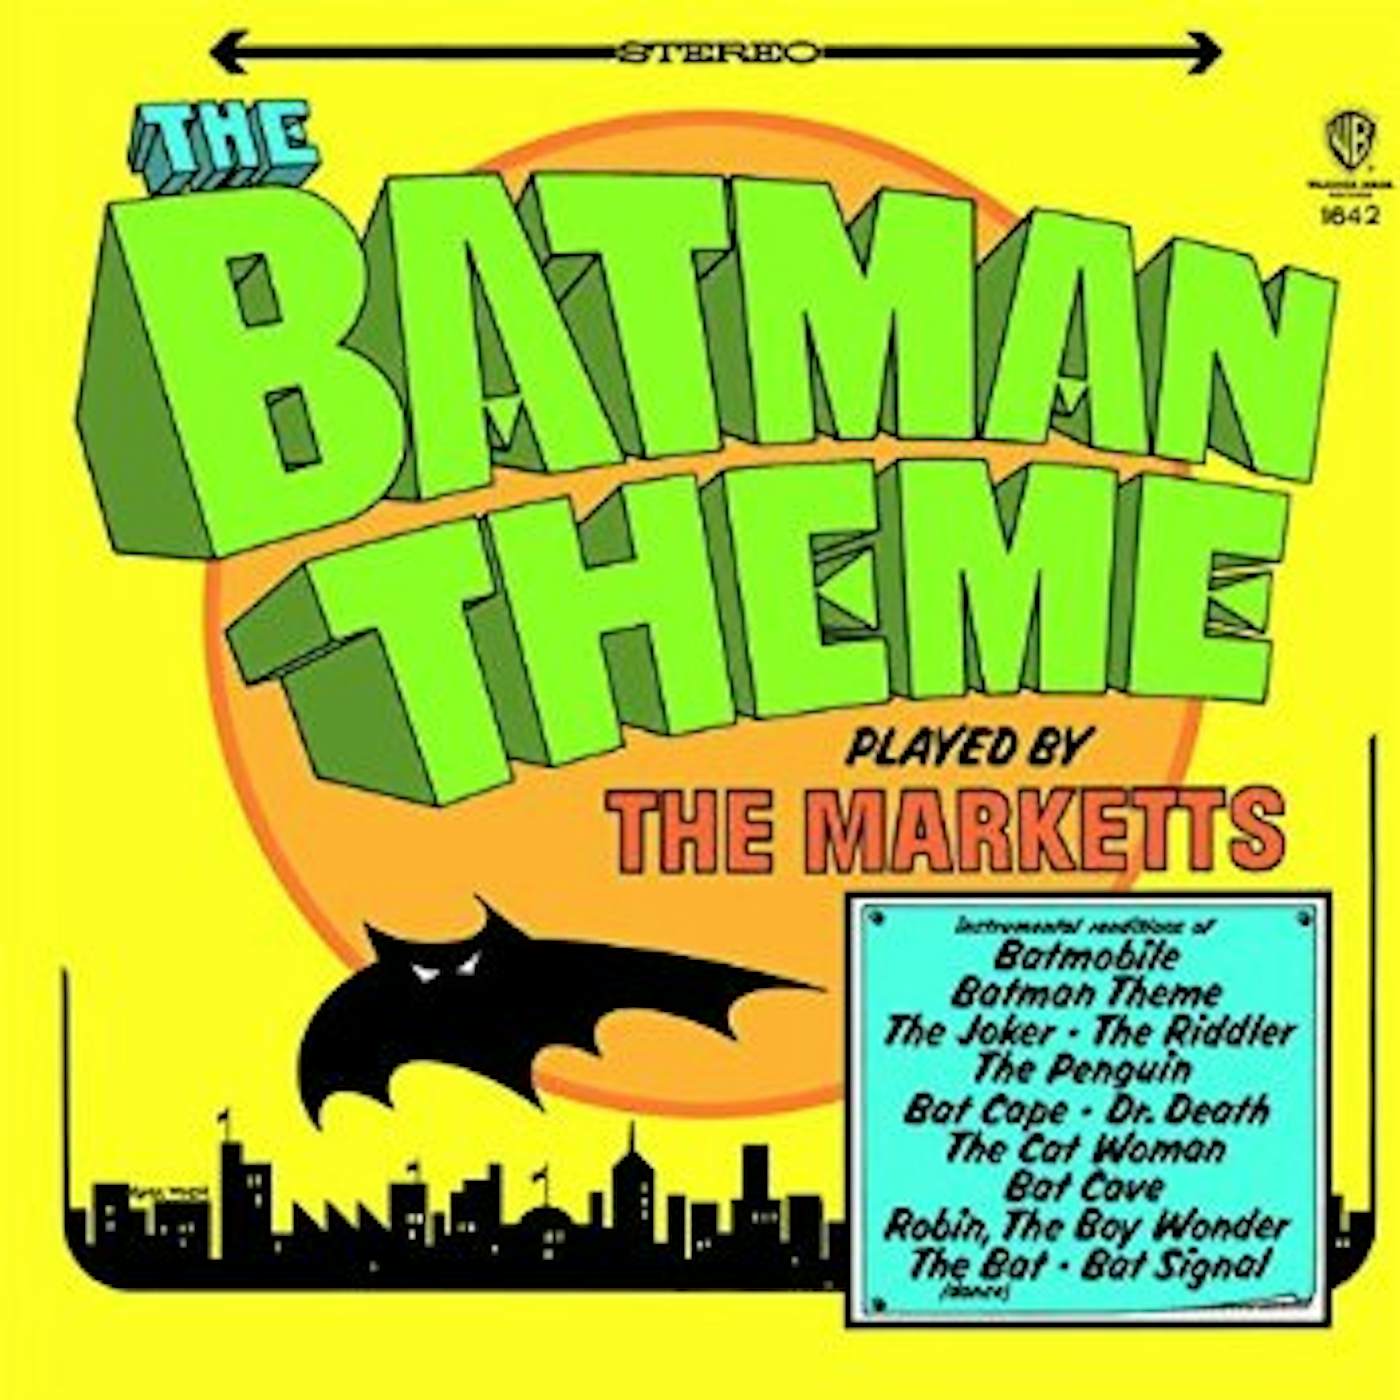 The Marketts BATMAN THEME PLAYED BY CD